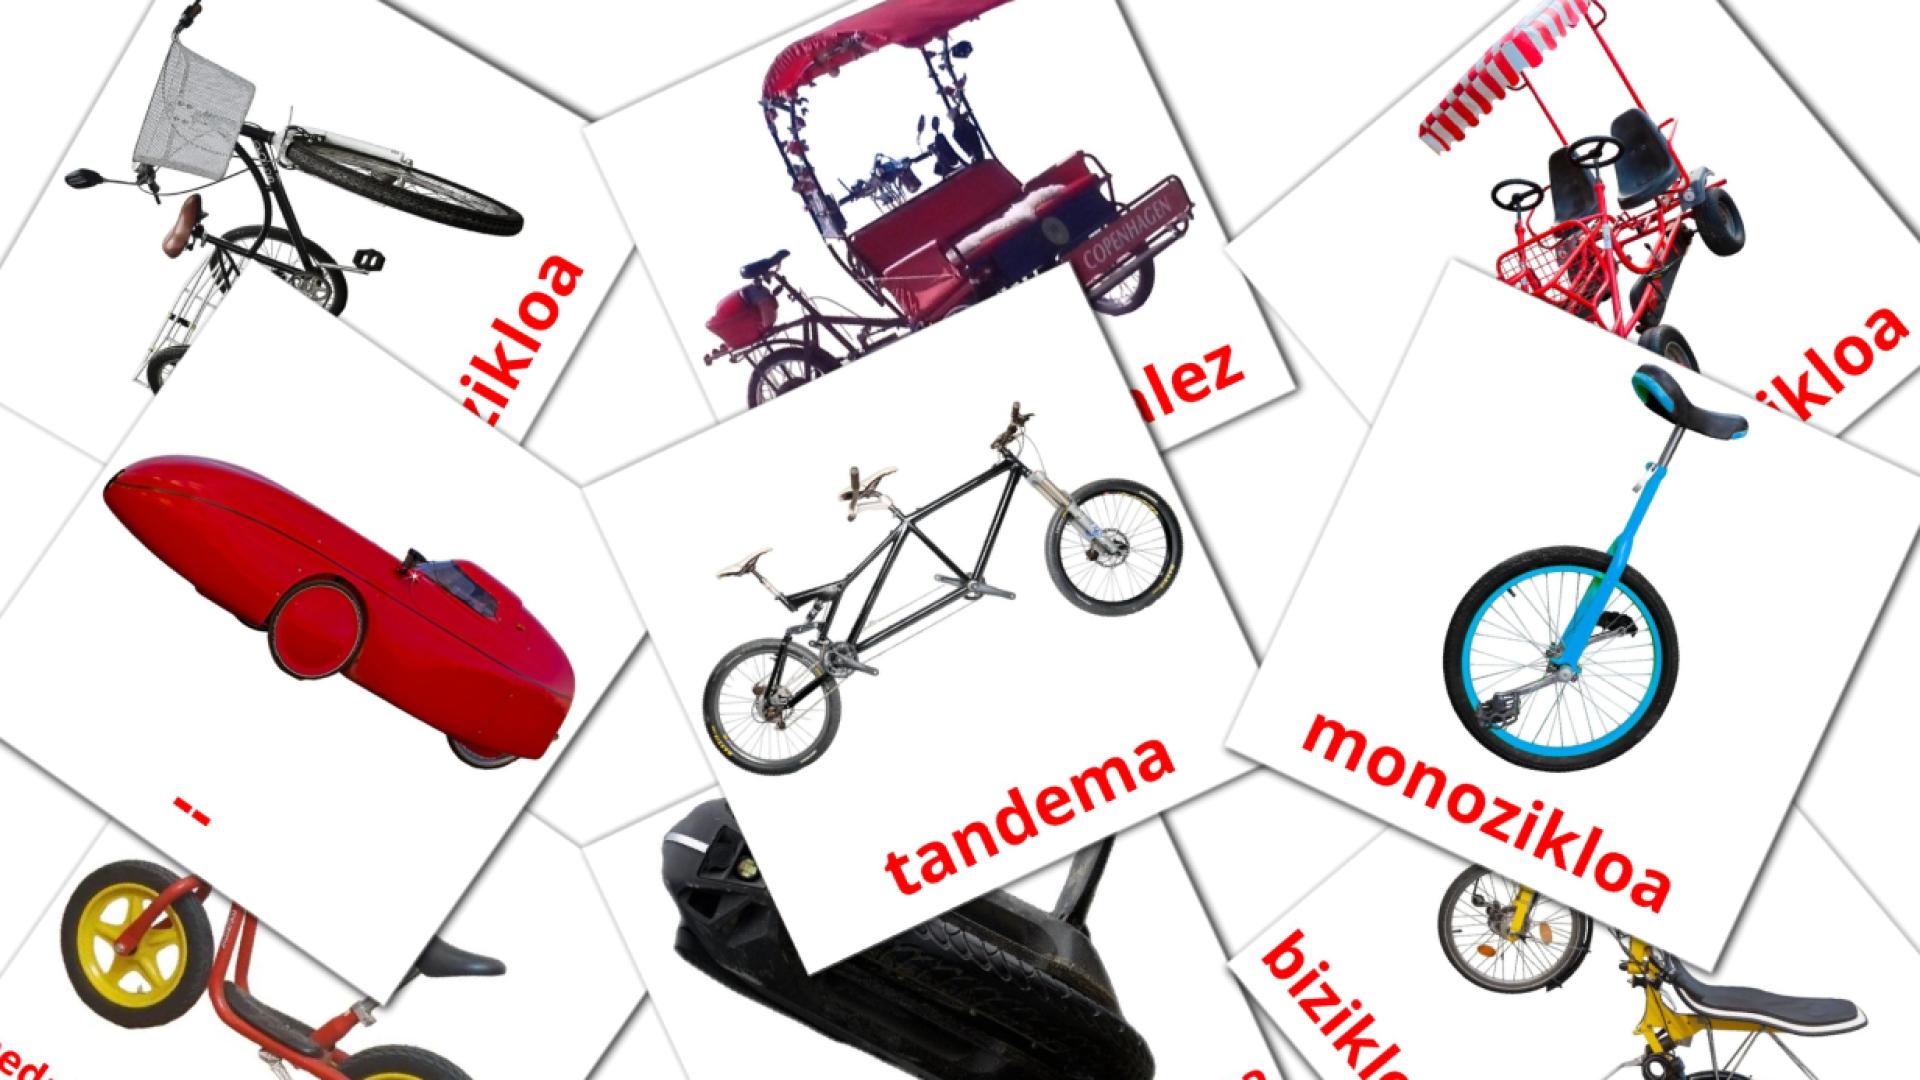 Bicycle transport - basque vocabulary cards